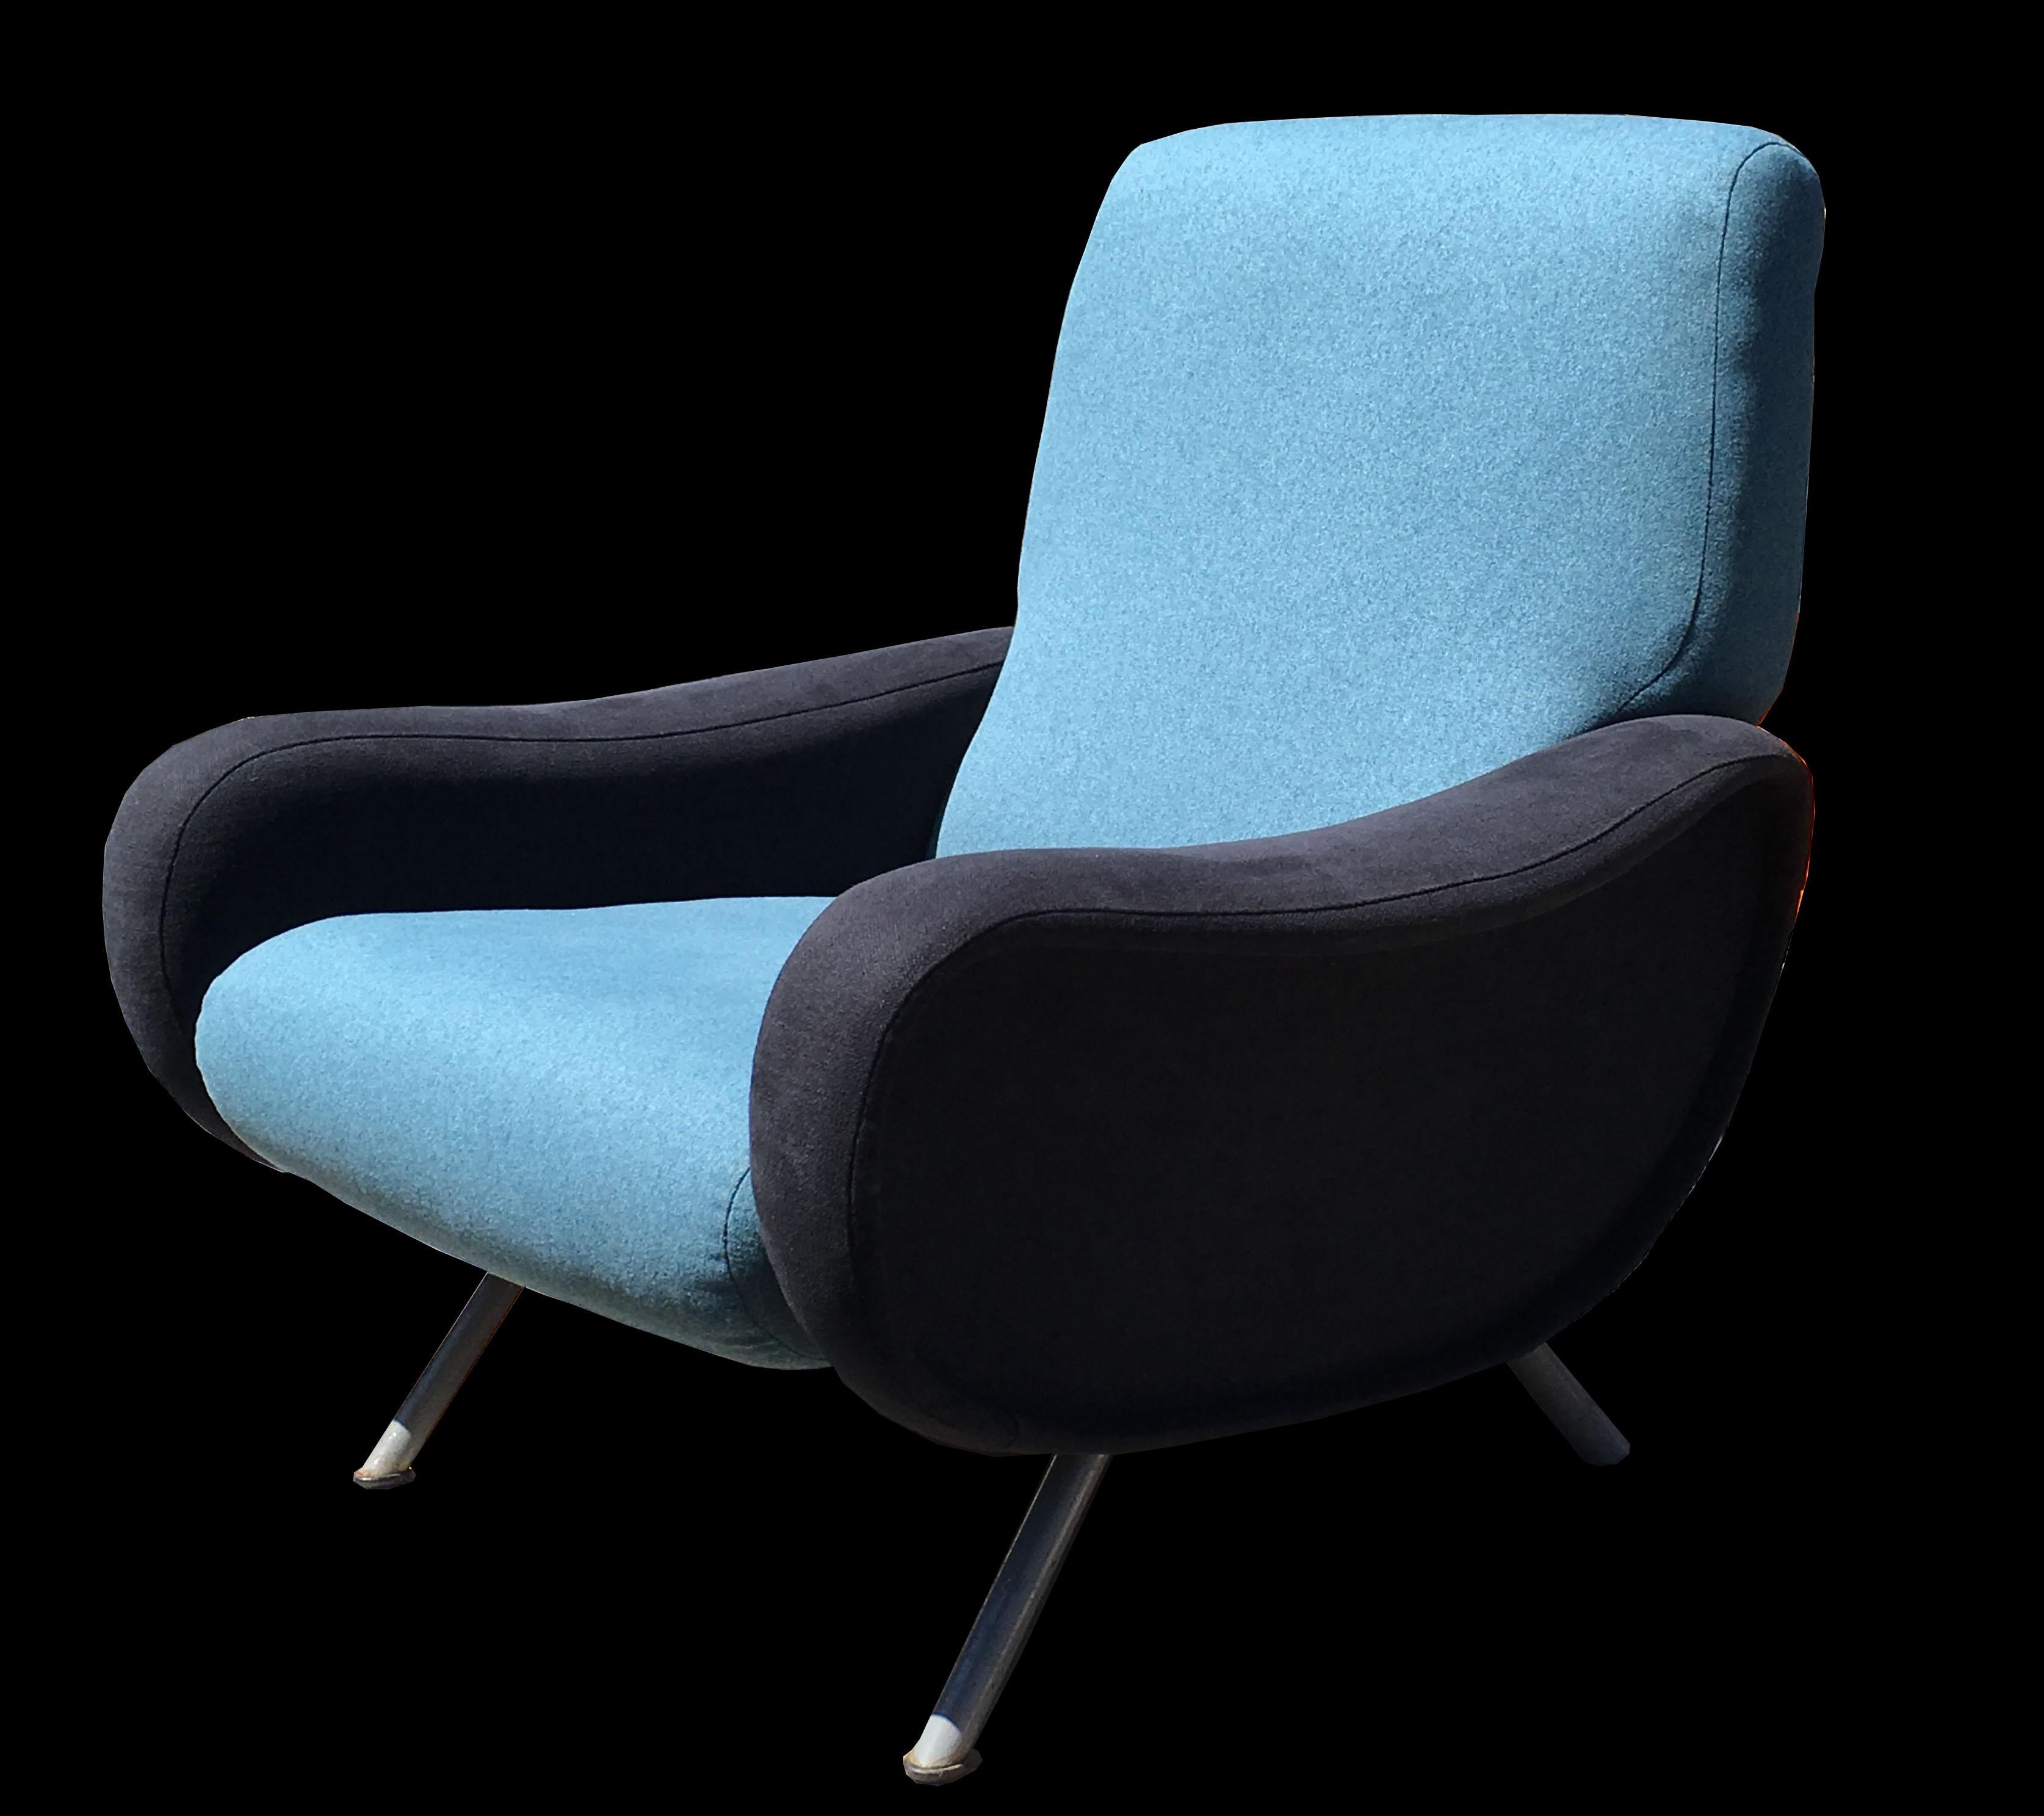 An original lady chair by Marco Zanuso for Arflex with fresh new upholstery in teal blue and black, in perfect condition.